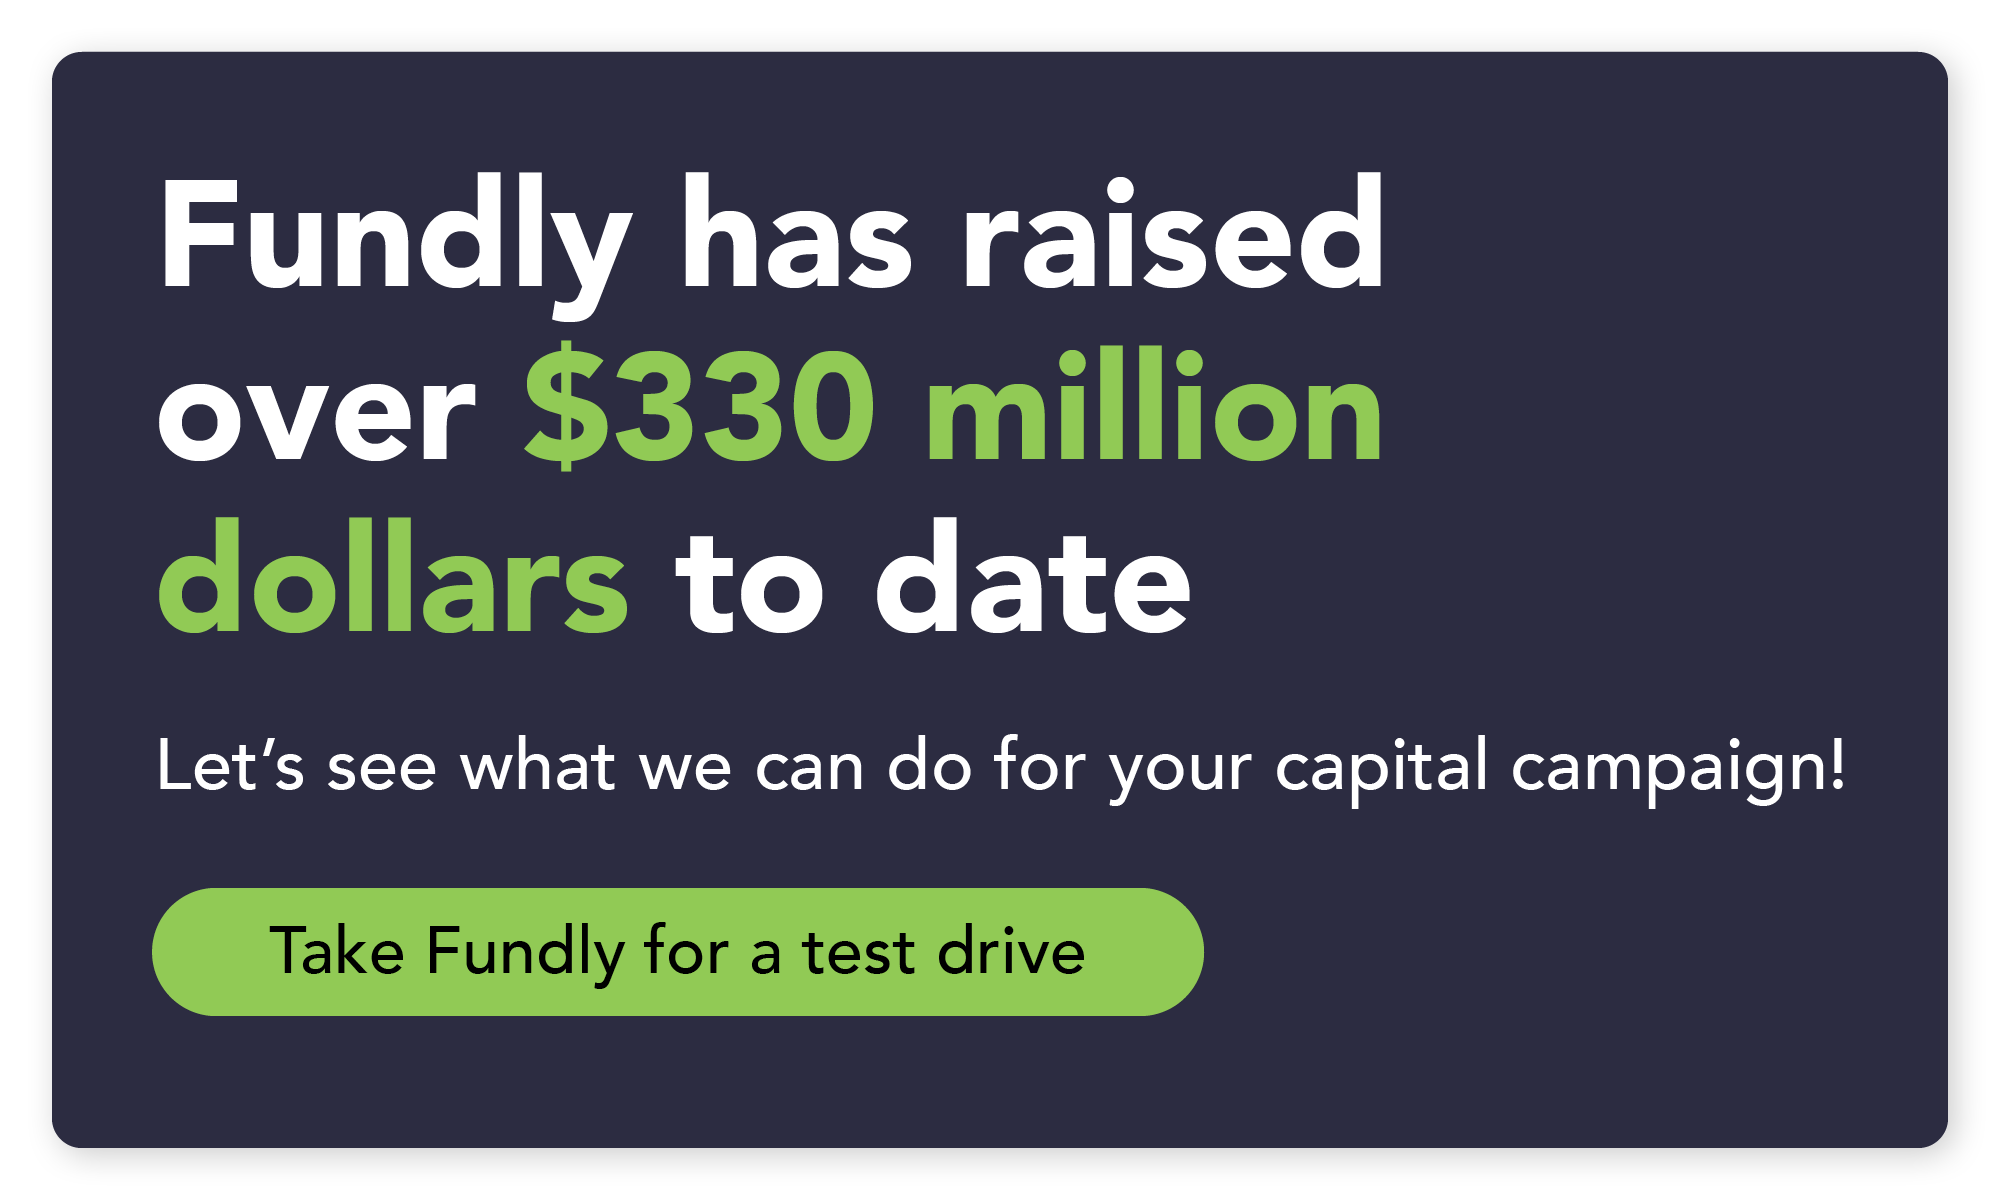 Click through to take Fundly for a test drive and find out what it can do for your capital campaign!